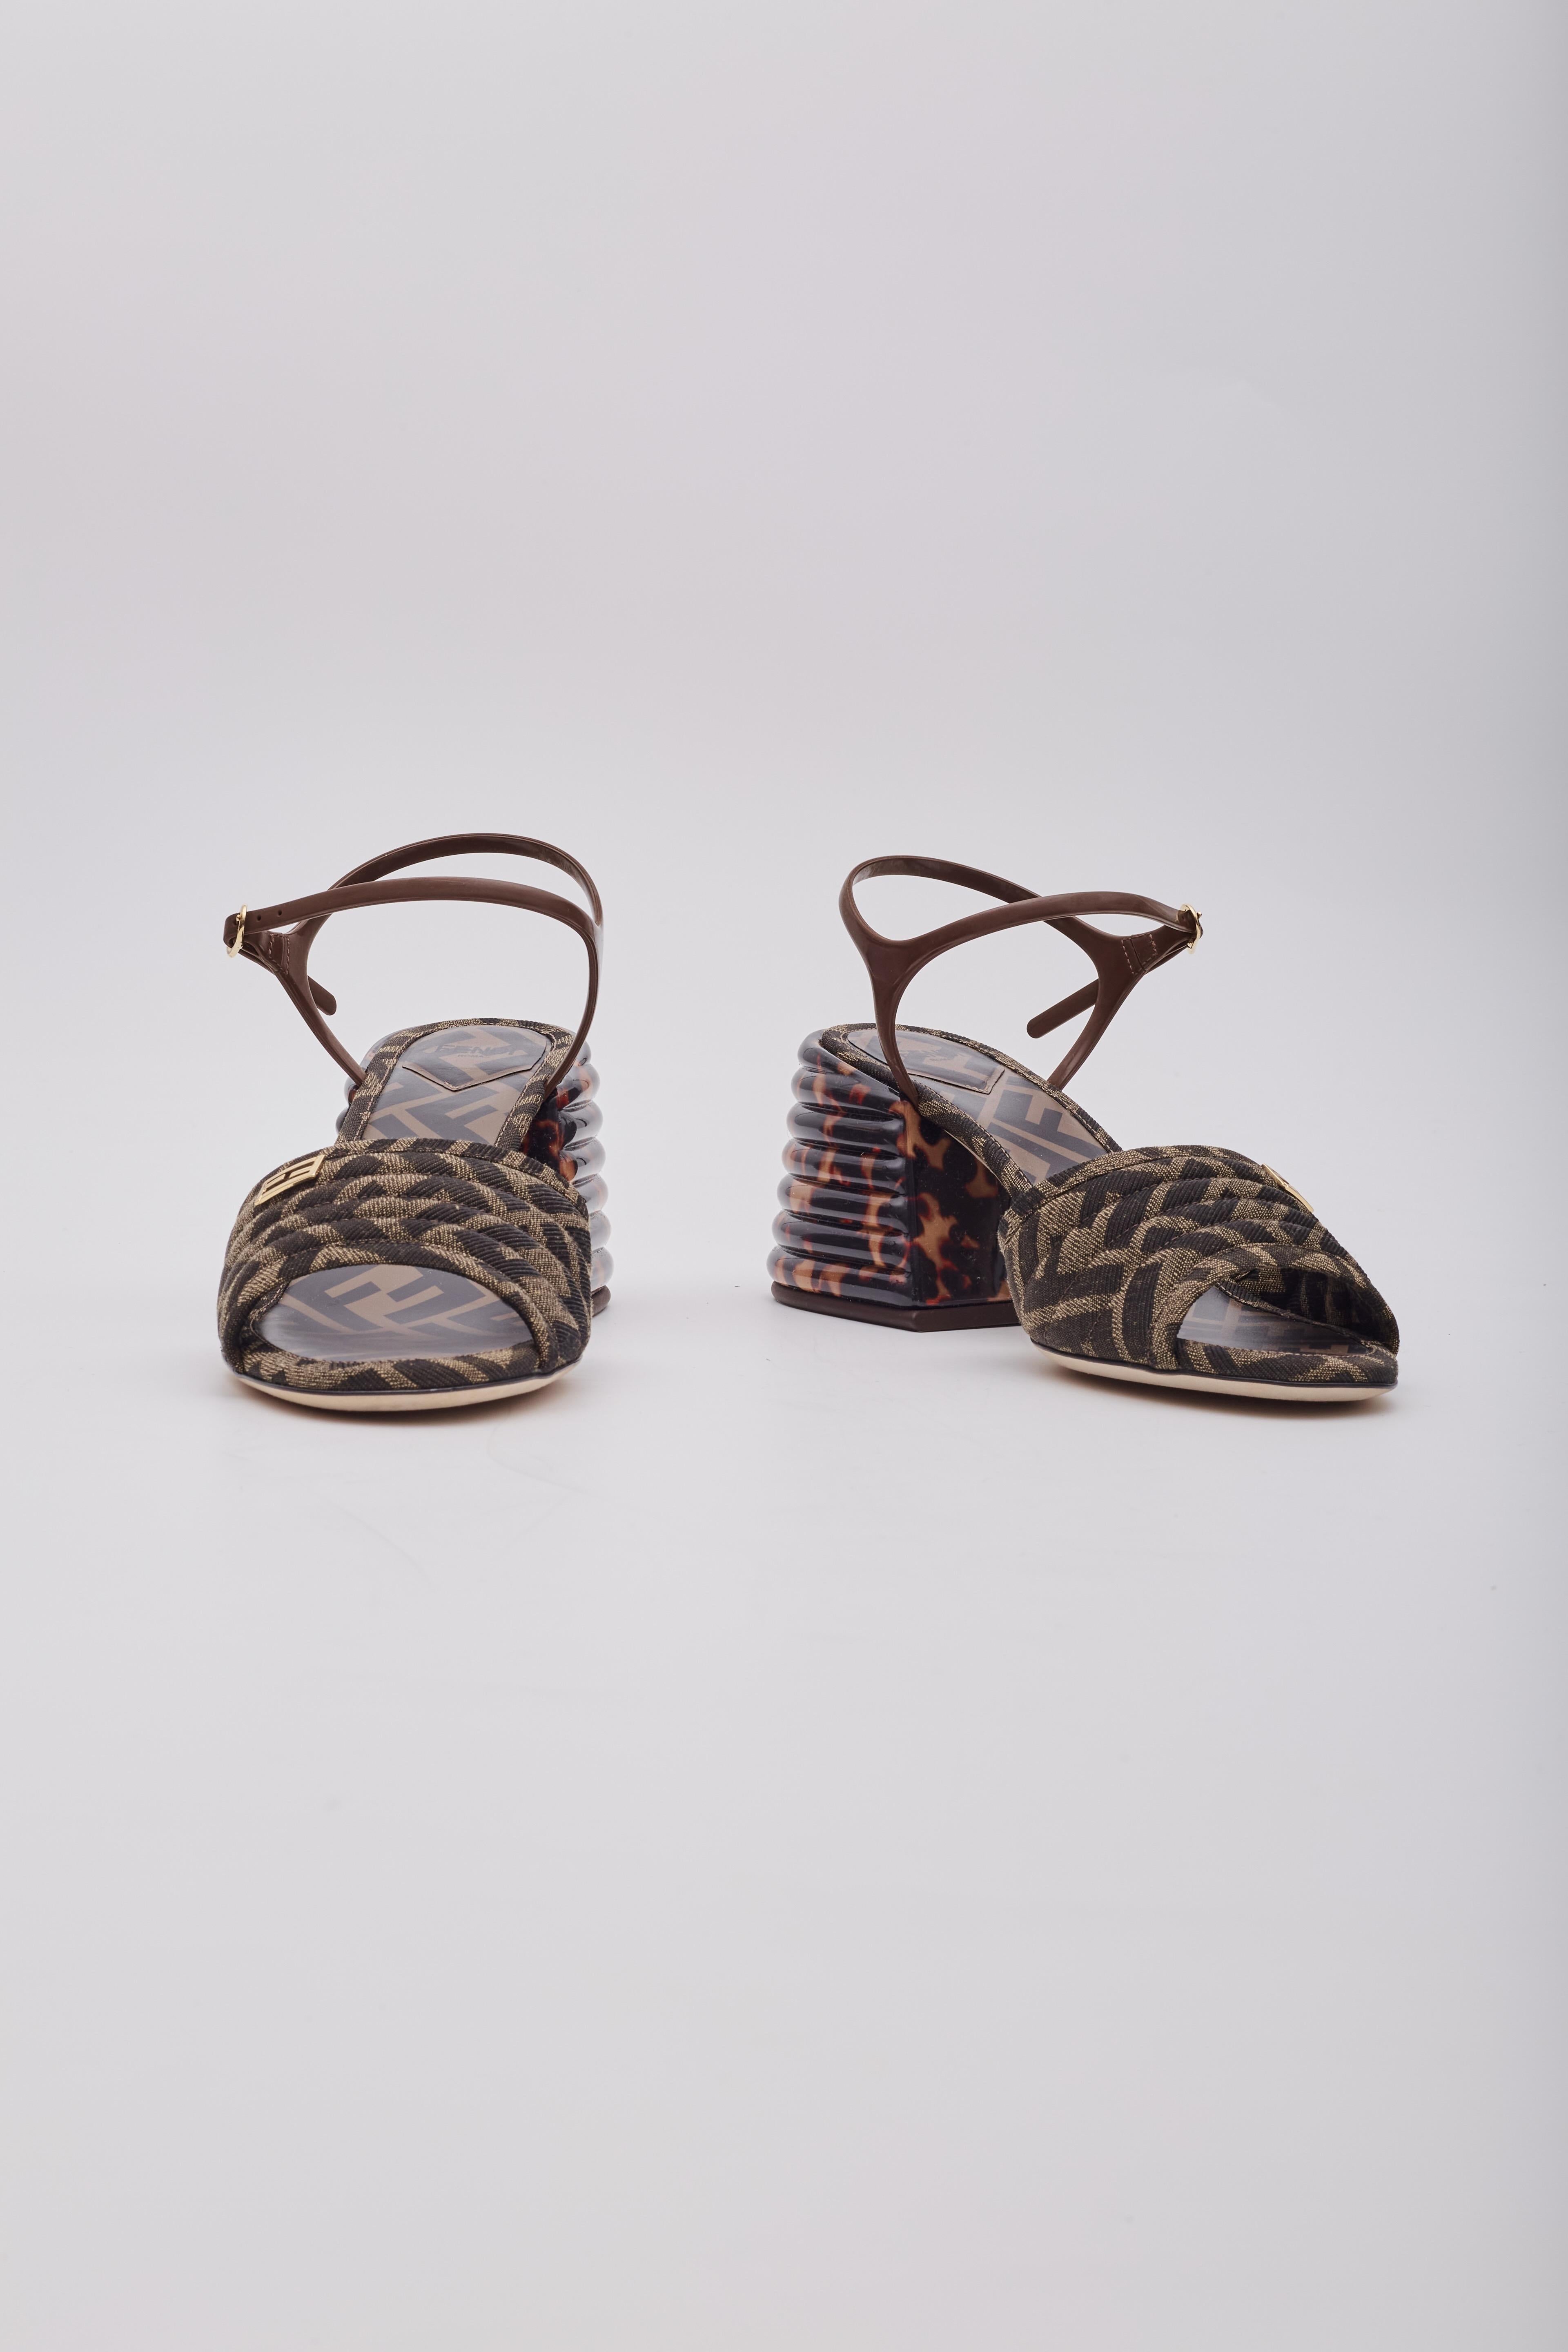 Fendi Tobacco Zucca FF Tortoise Slingback Sandal Wedges (EU 39.5) In Excellent Condition For Sale In Montreal, Quebec